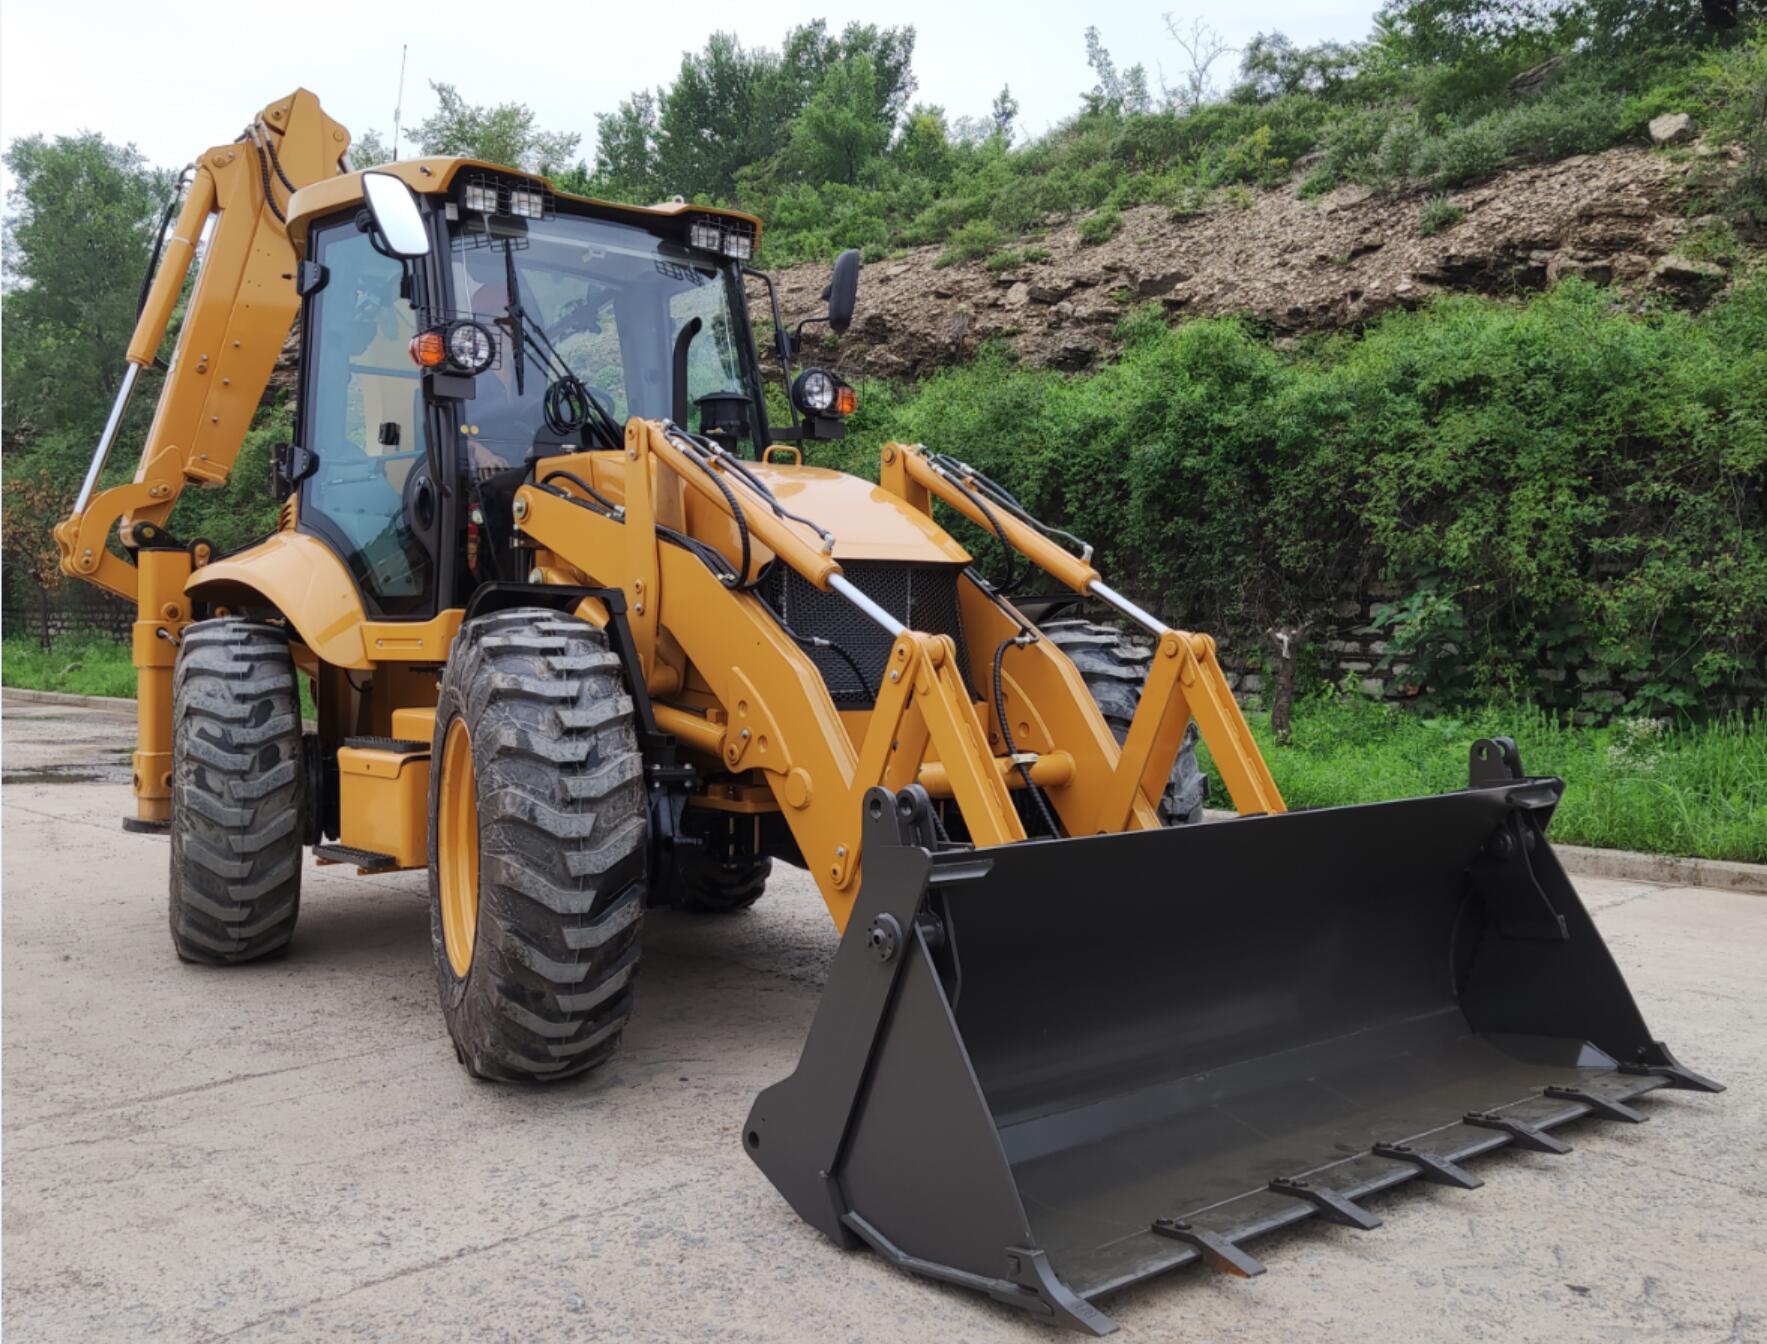 Backhoe loaders: Increased productivity, lower fuel use